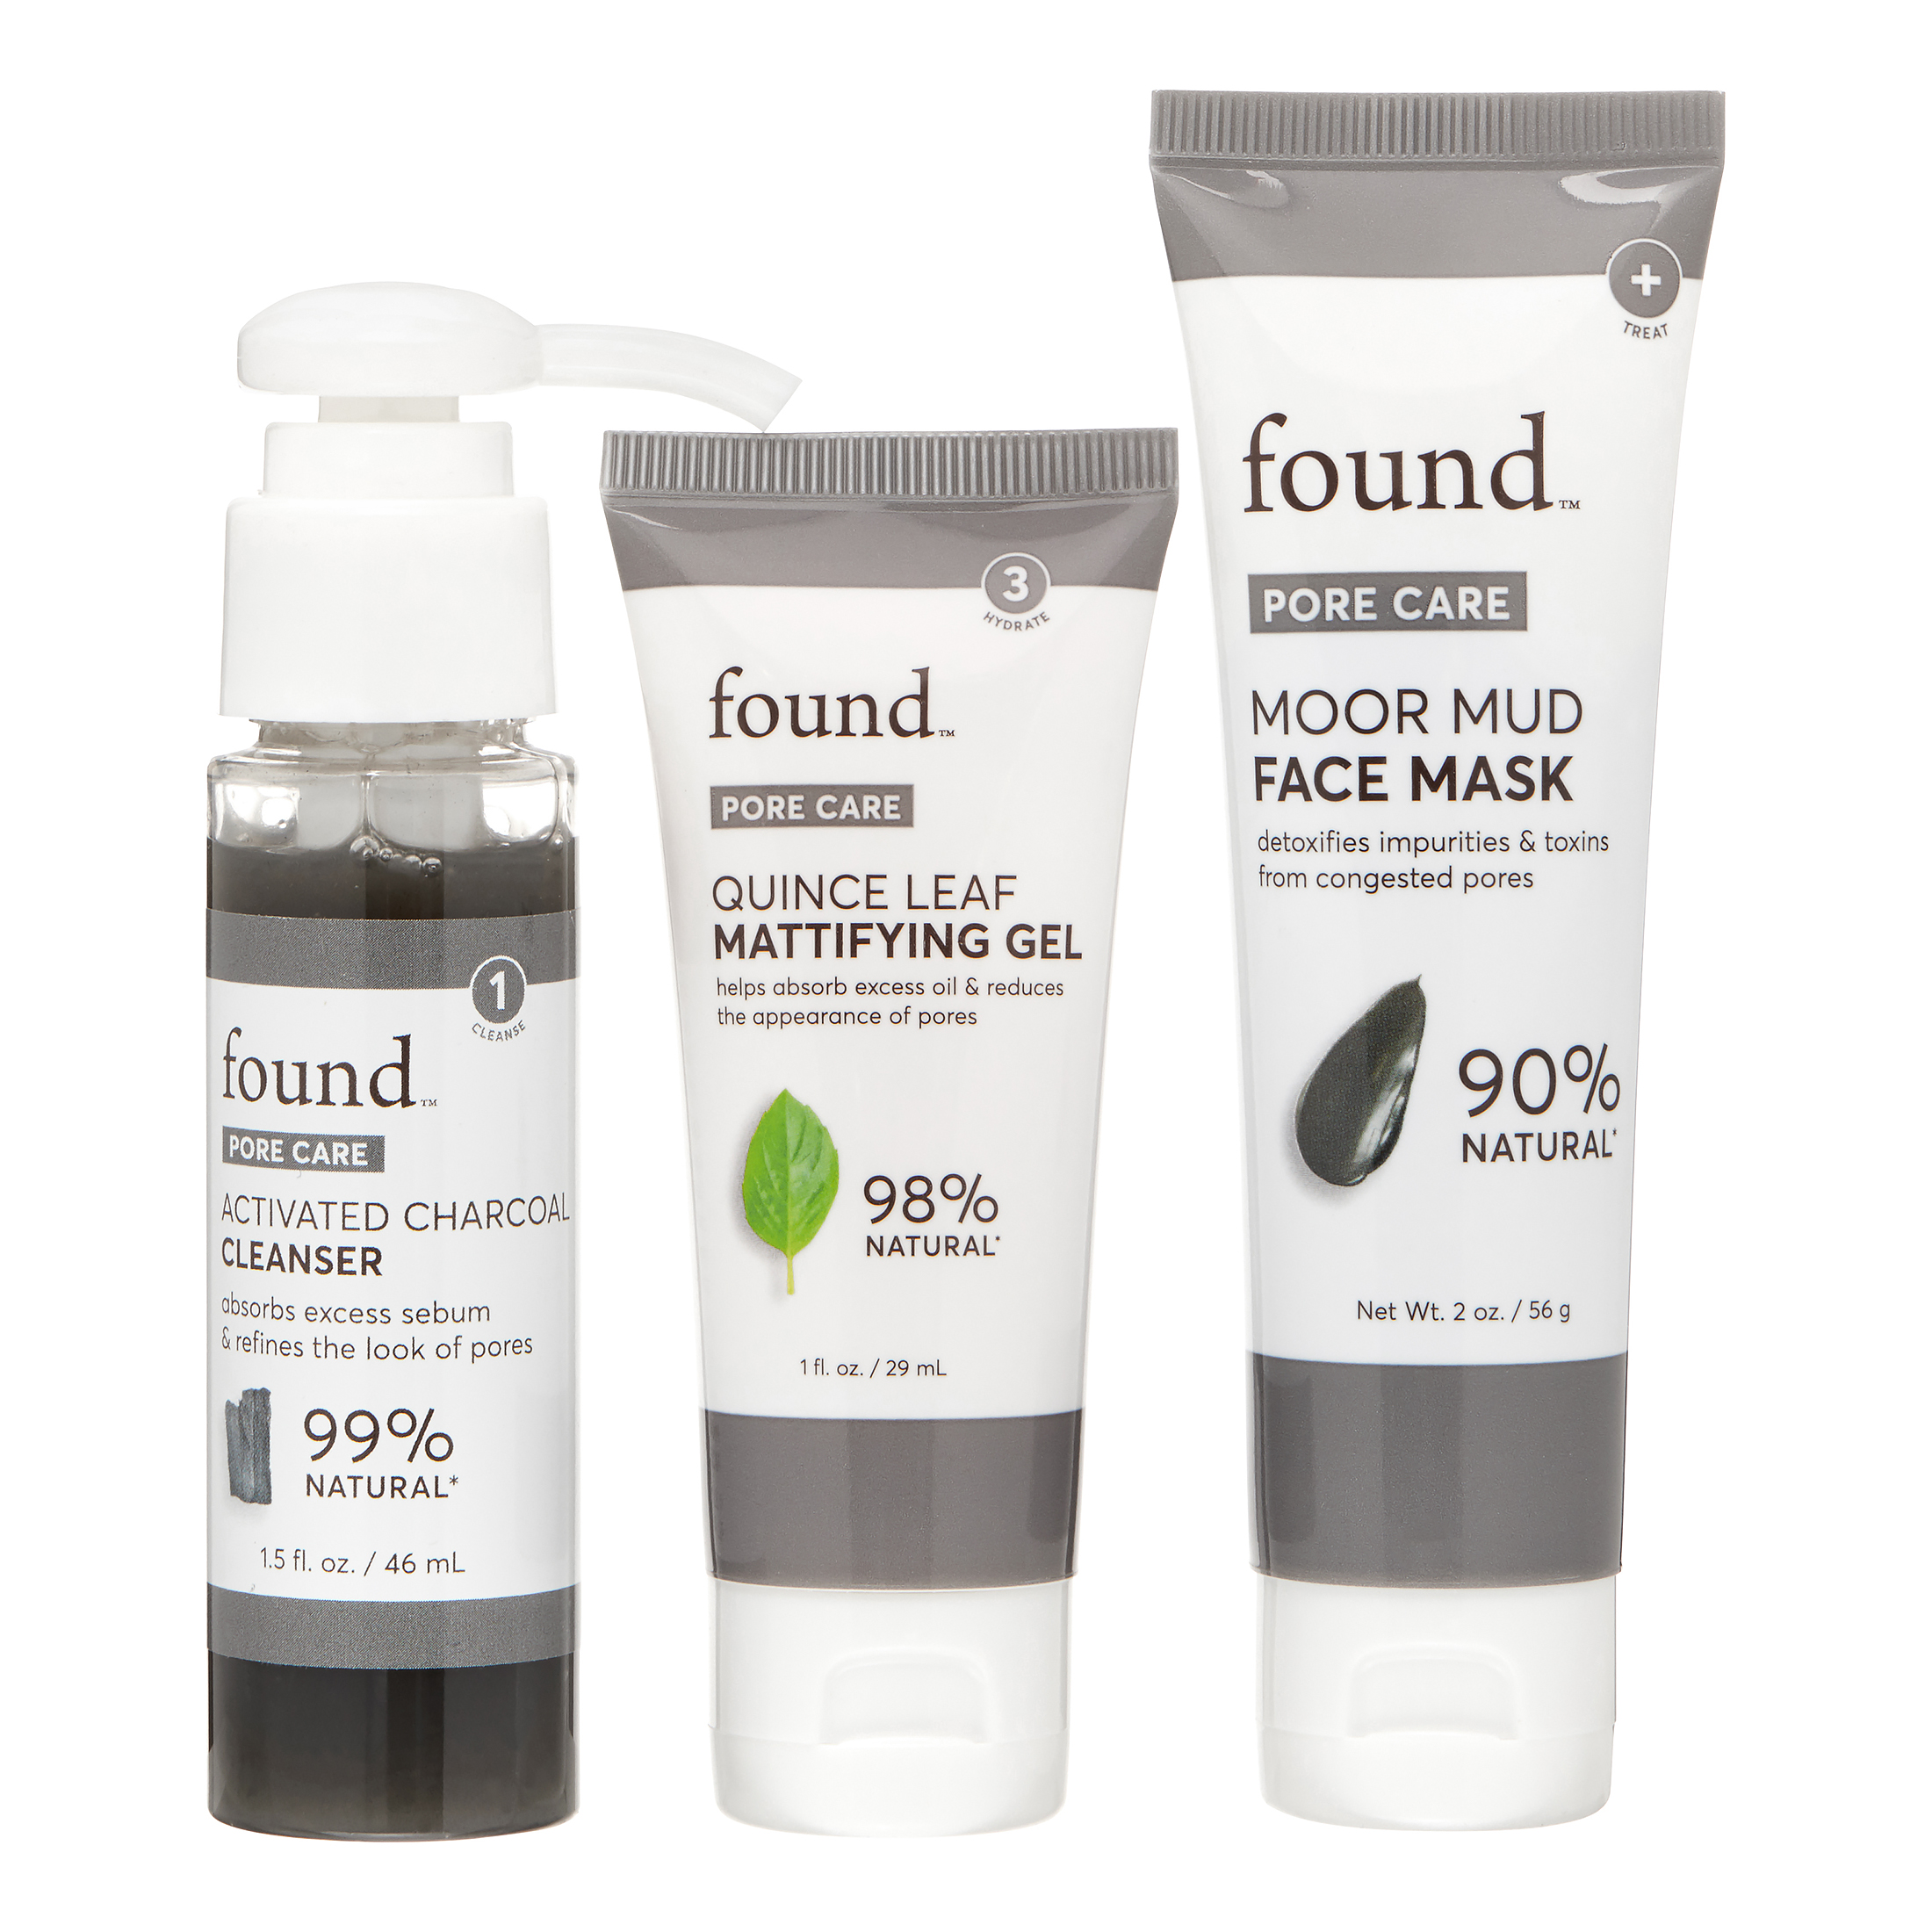 FOUND PORE CARE Facial Detox Kit: Activated Charcoal Cleanser, Quince Leaf Mattifying Gel, Moor Mud Face Mask - image 1 of 10